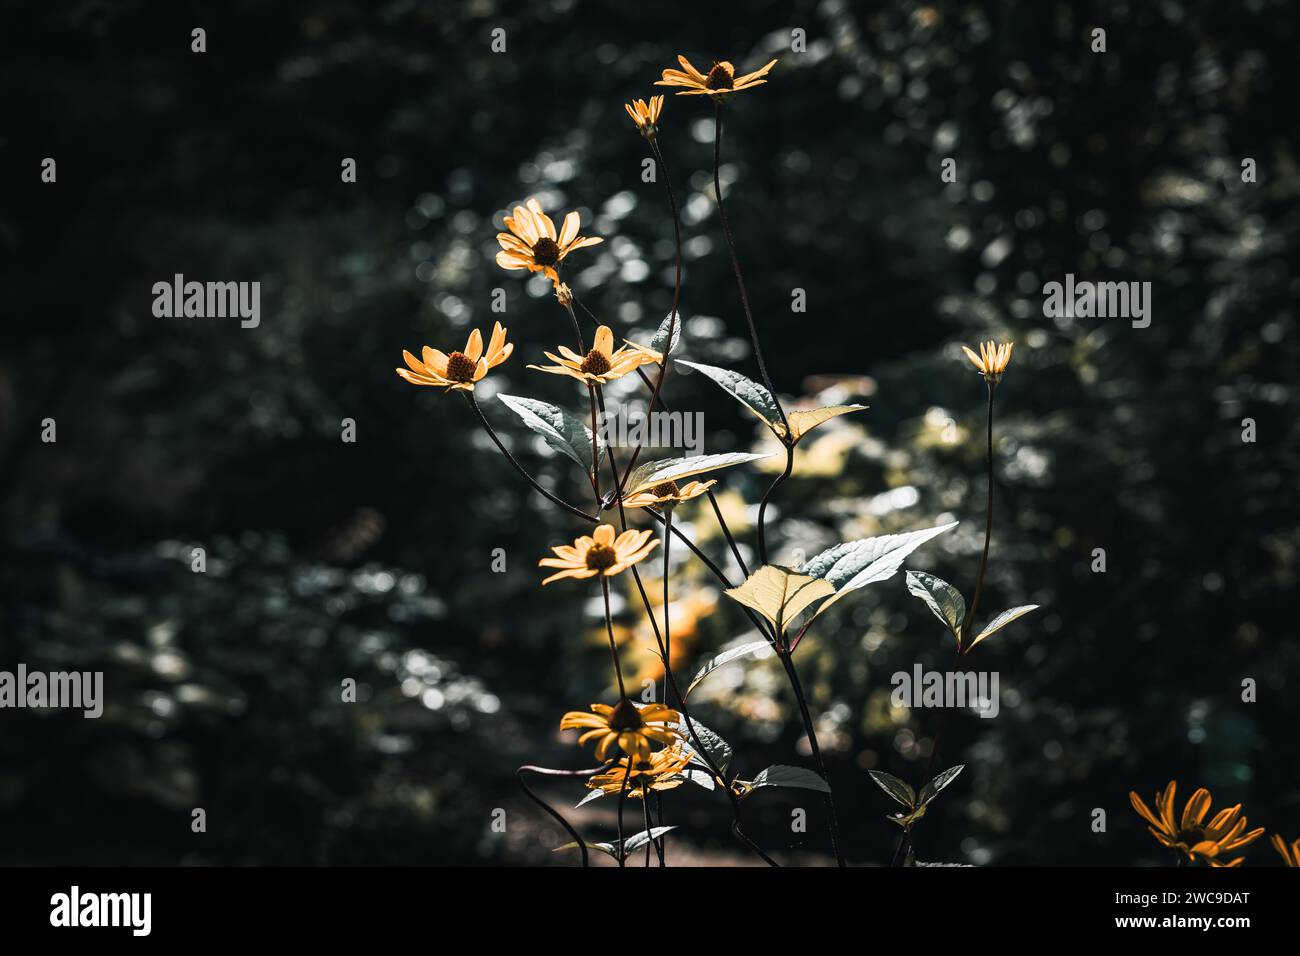 A vibrant yellow floral arrangement near a lush cluster of trees Stock Photo